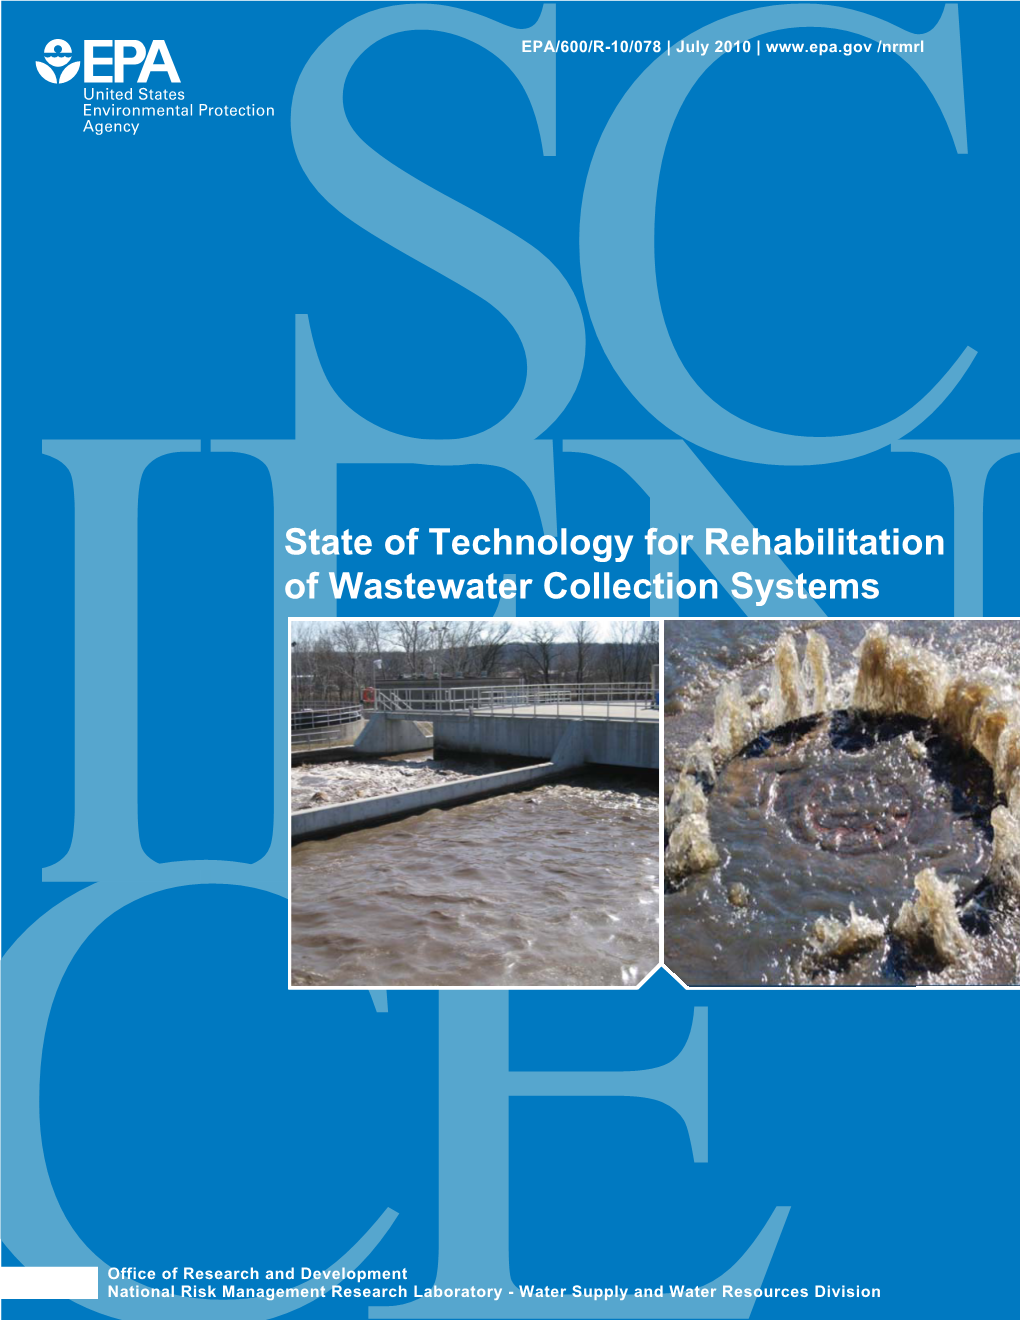 State of Technology for Rehabilitation of Wastewater Collection Systems